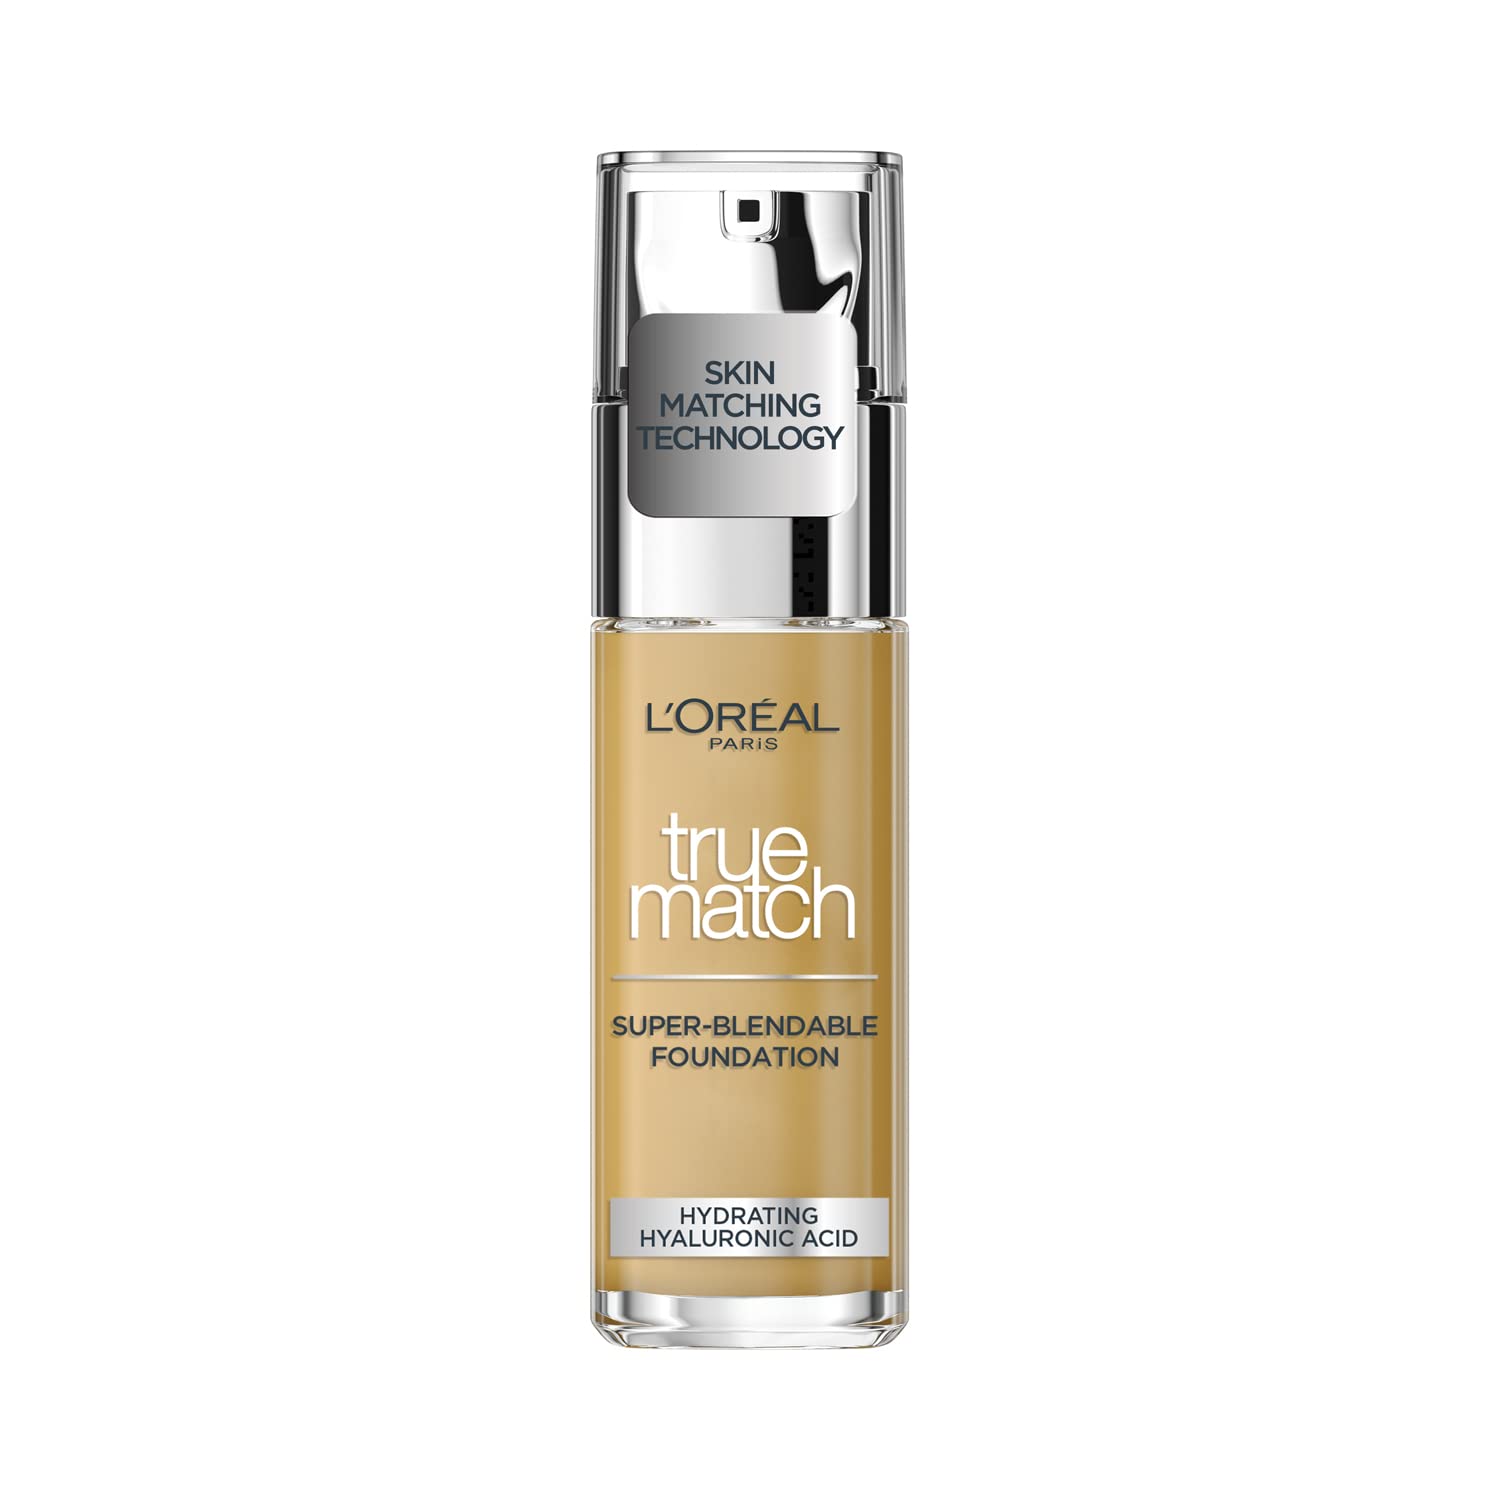 L'Oréal Paris True Match Liquid Foundation with Hyaluronic Acid 30ml and SPF